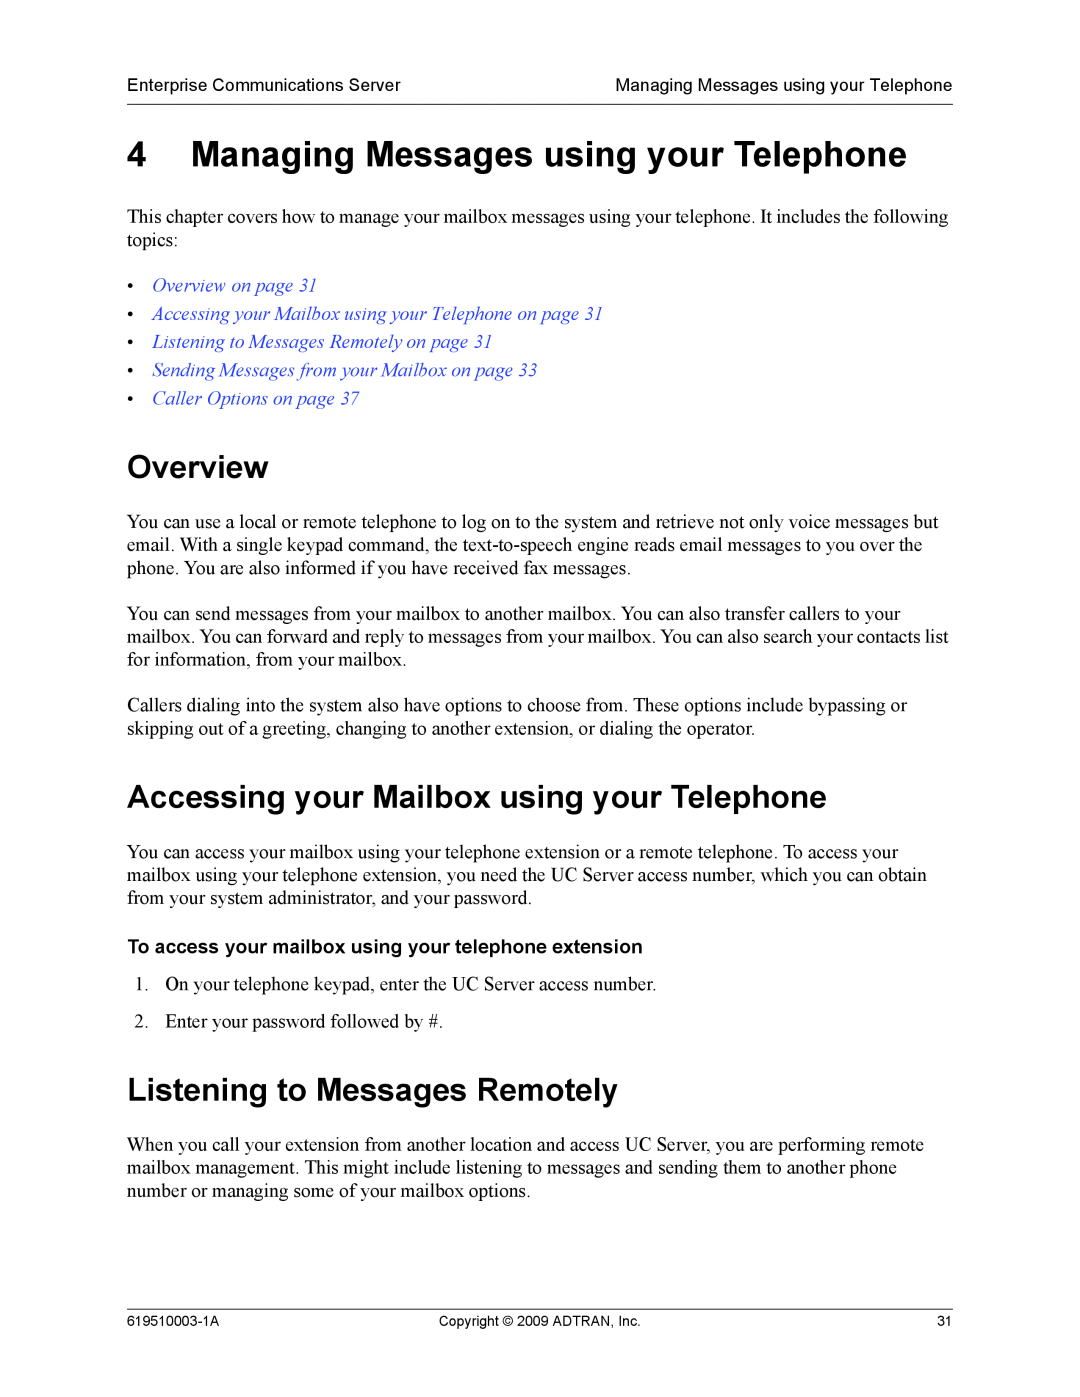 ADTRAN 619510003-1A manual Managing Messages using your Telephone, Accessing your Mailbox using your Telephone, Overview 